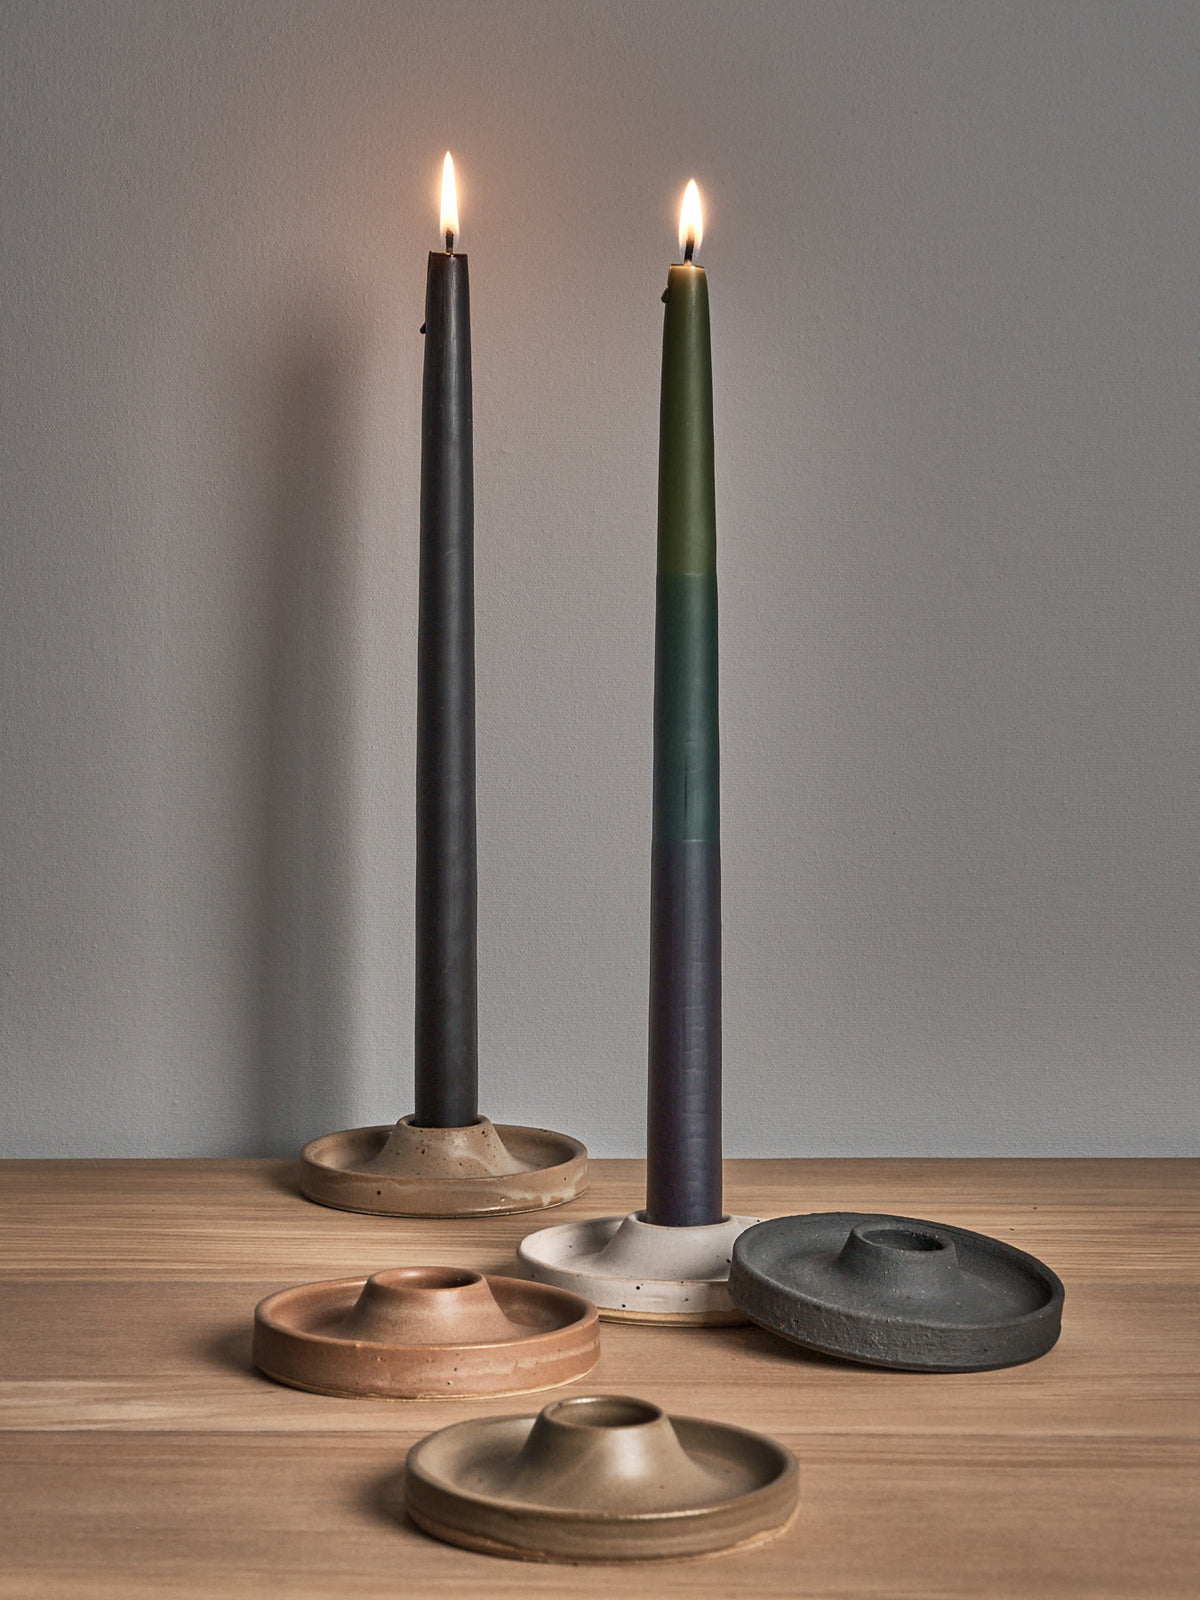 Three Candle Holder - Black by deborah sweeney on a wooden table next to each other.